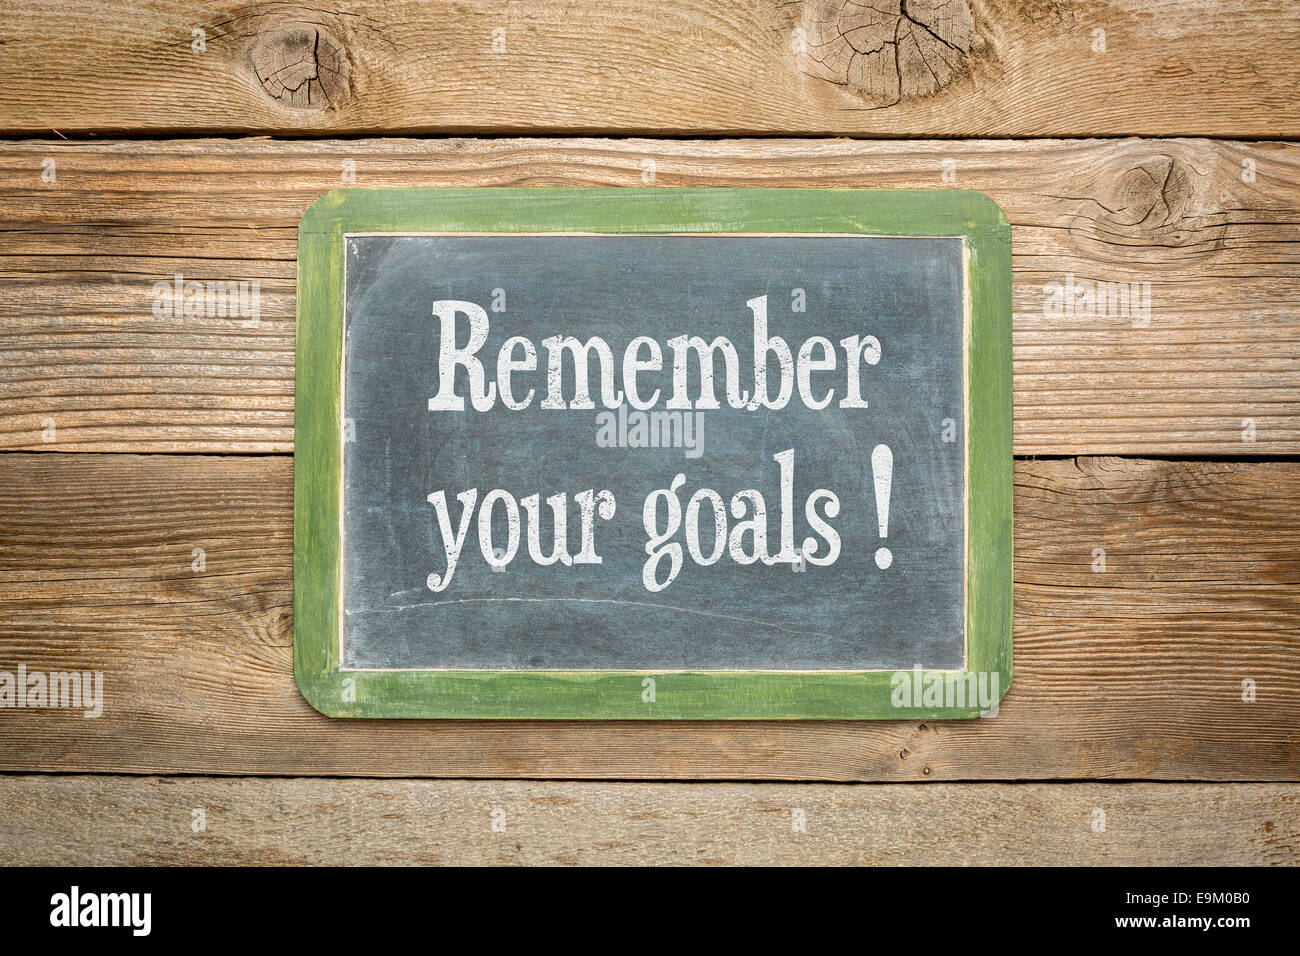 remember your goals reminder on a  slate blackboard against rustic weathered wood planks Stock Photo